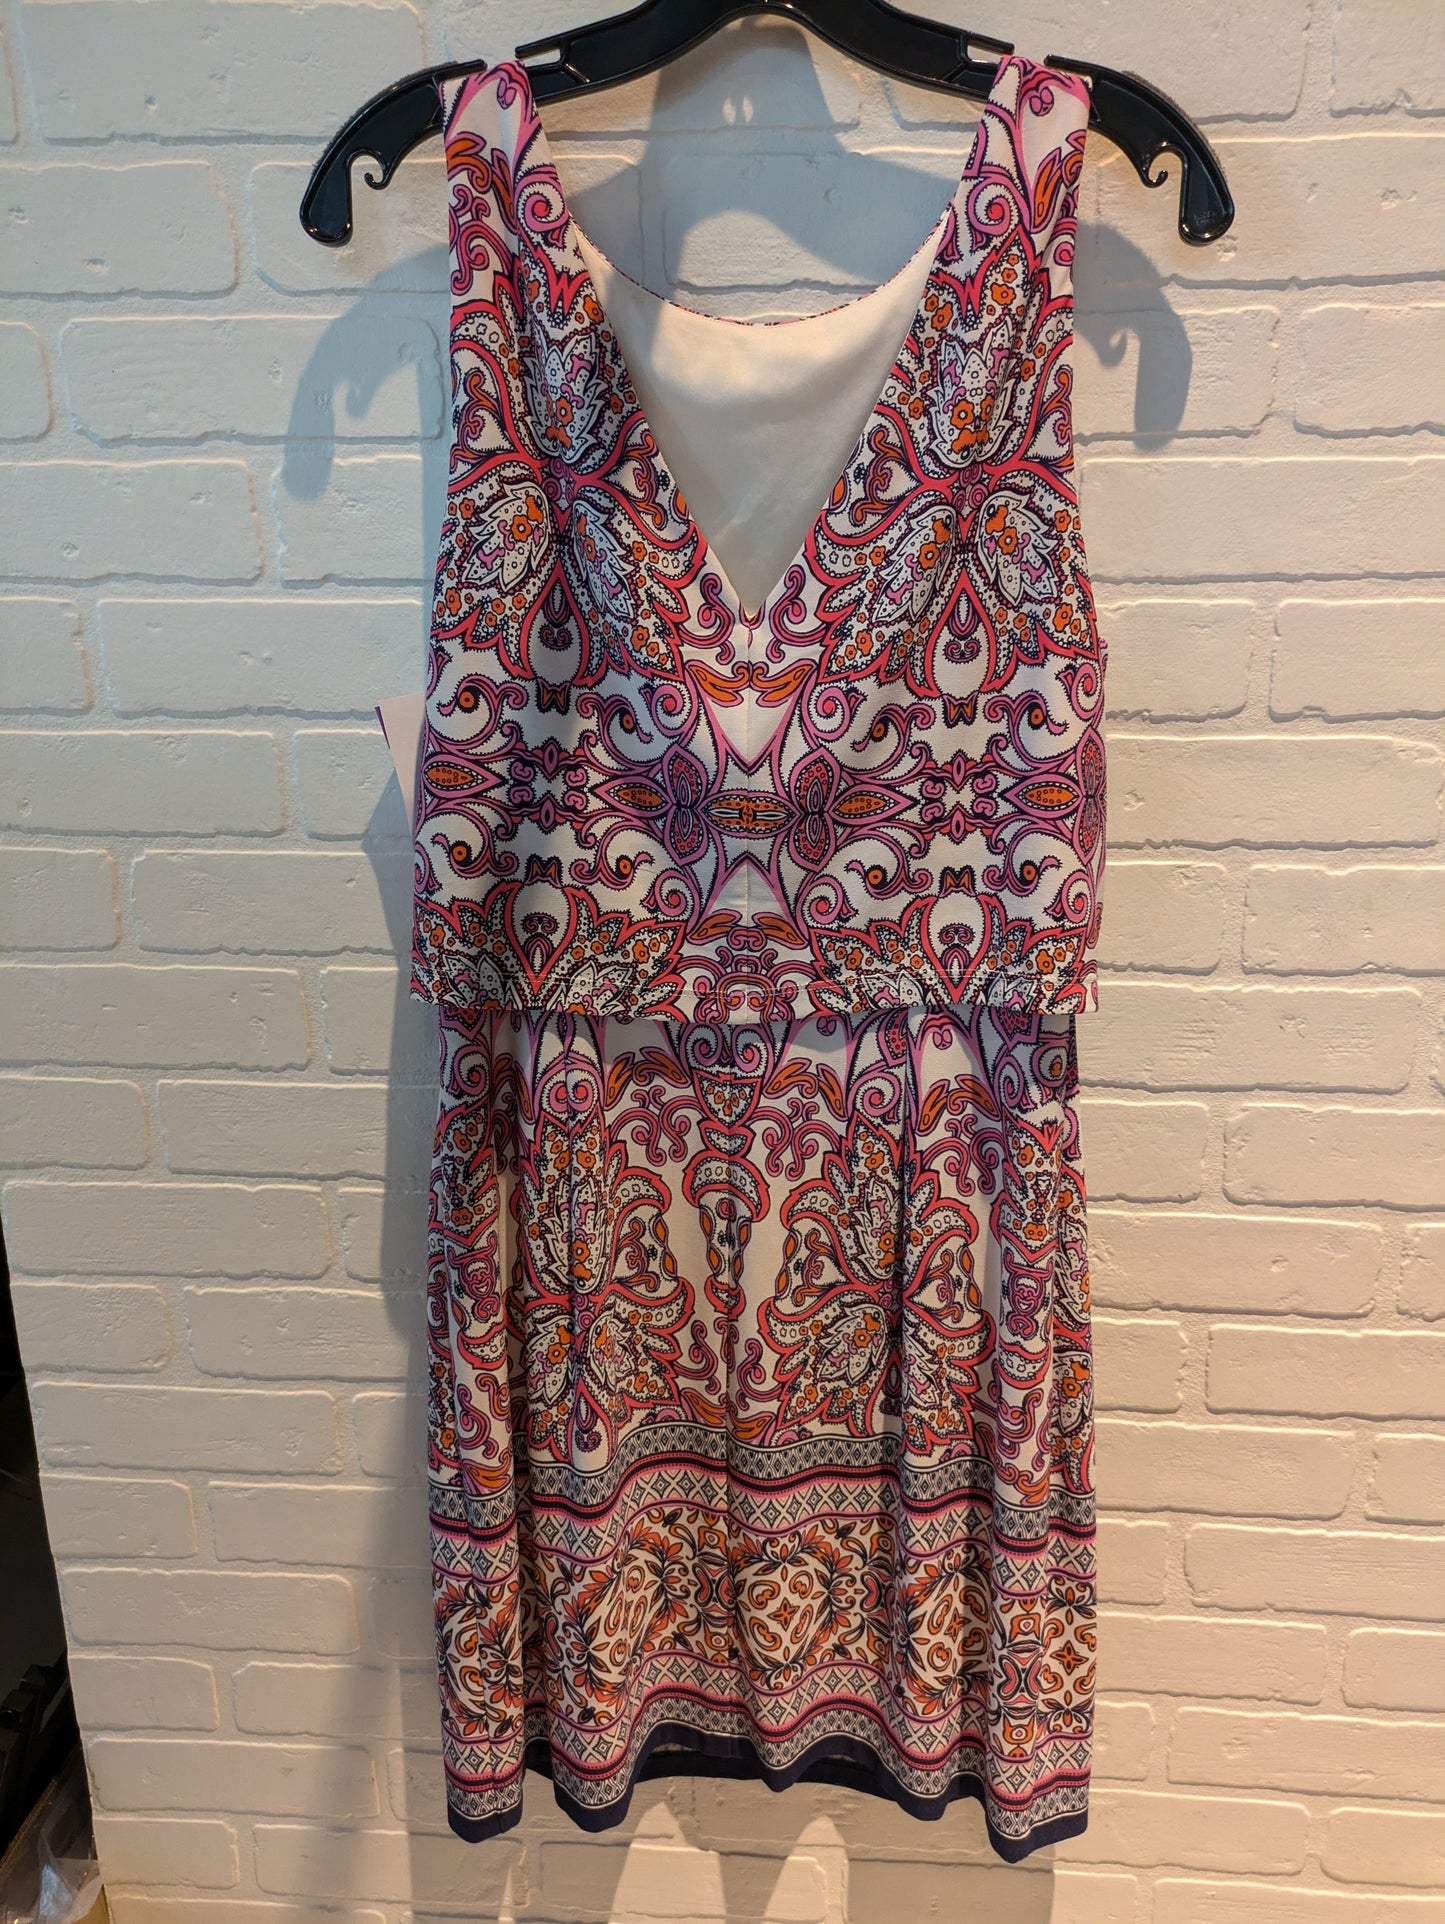 Pink & White Dress Work Vince Camuto, Size L